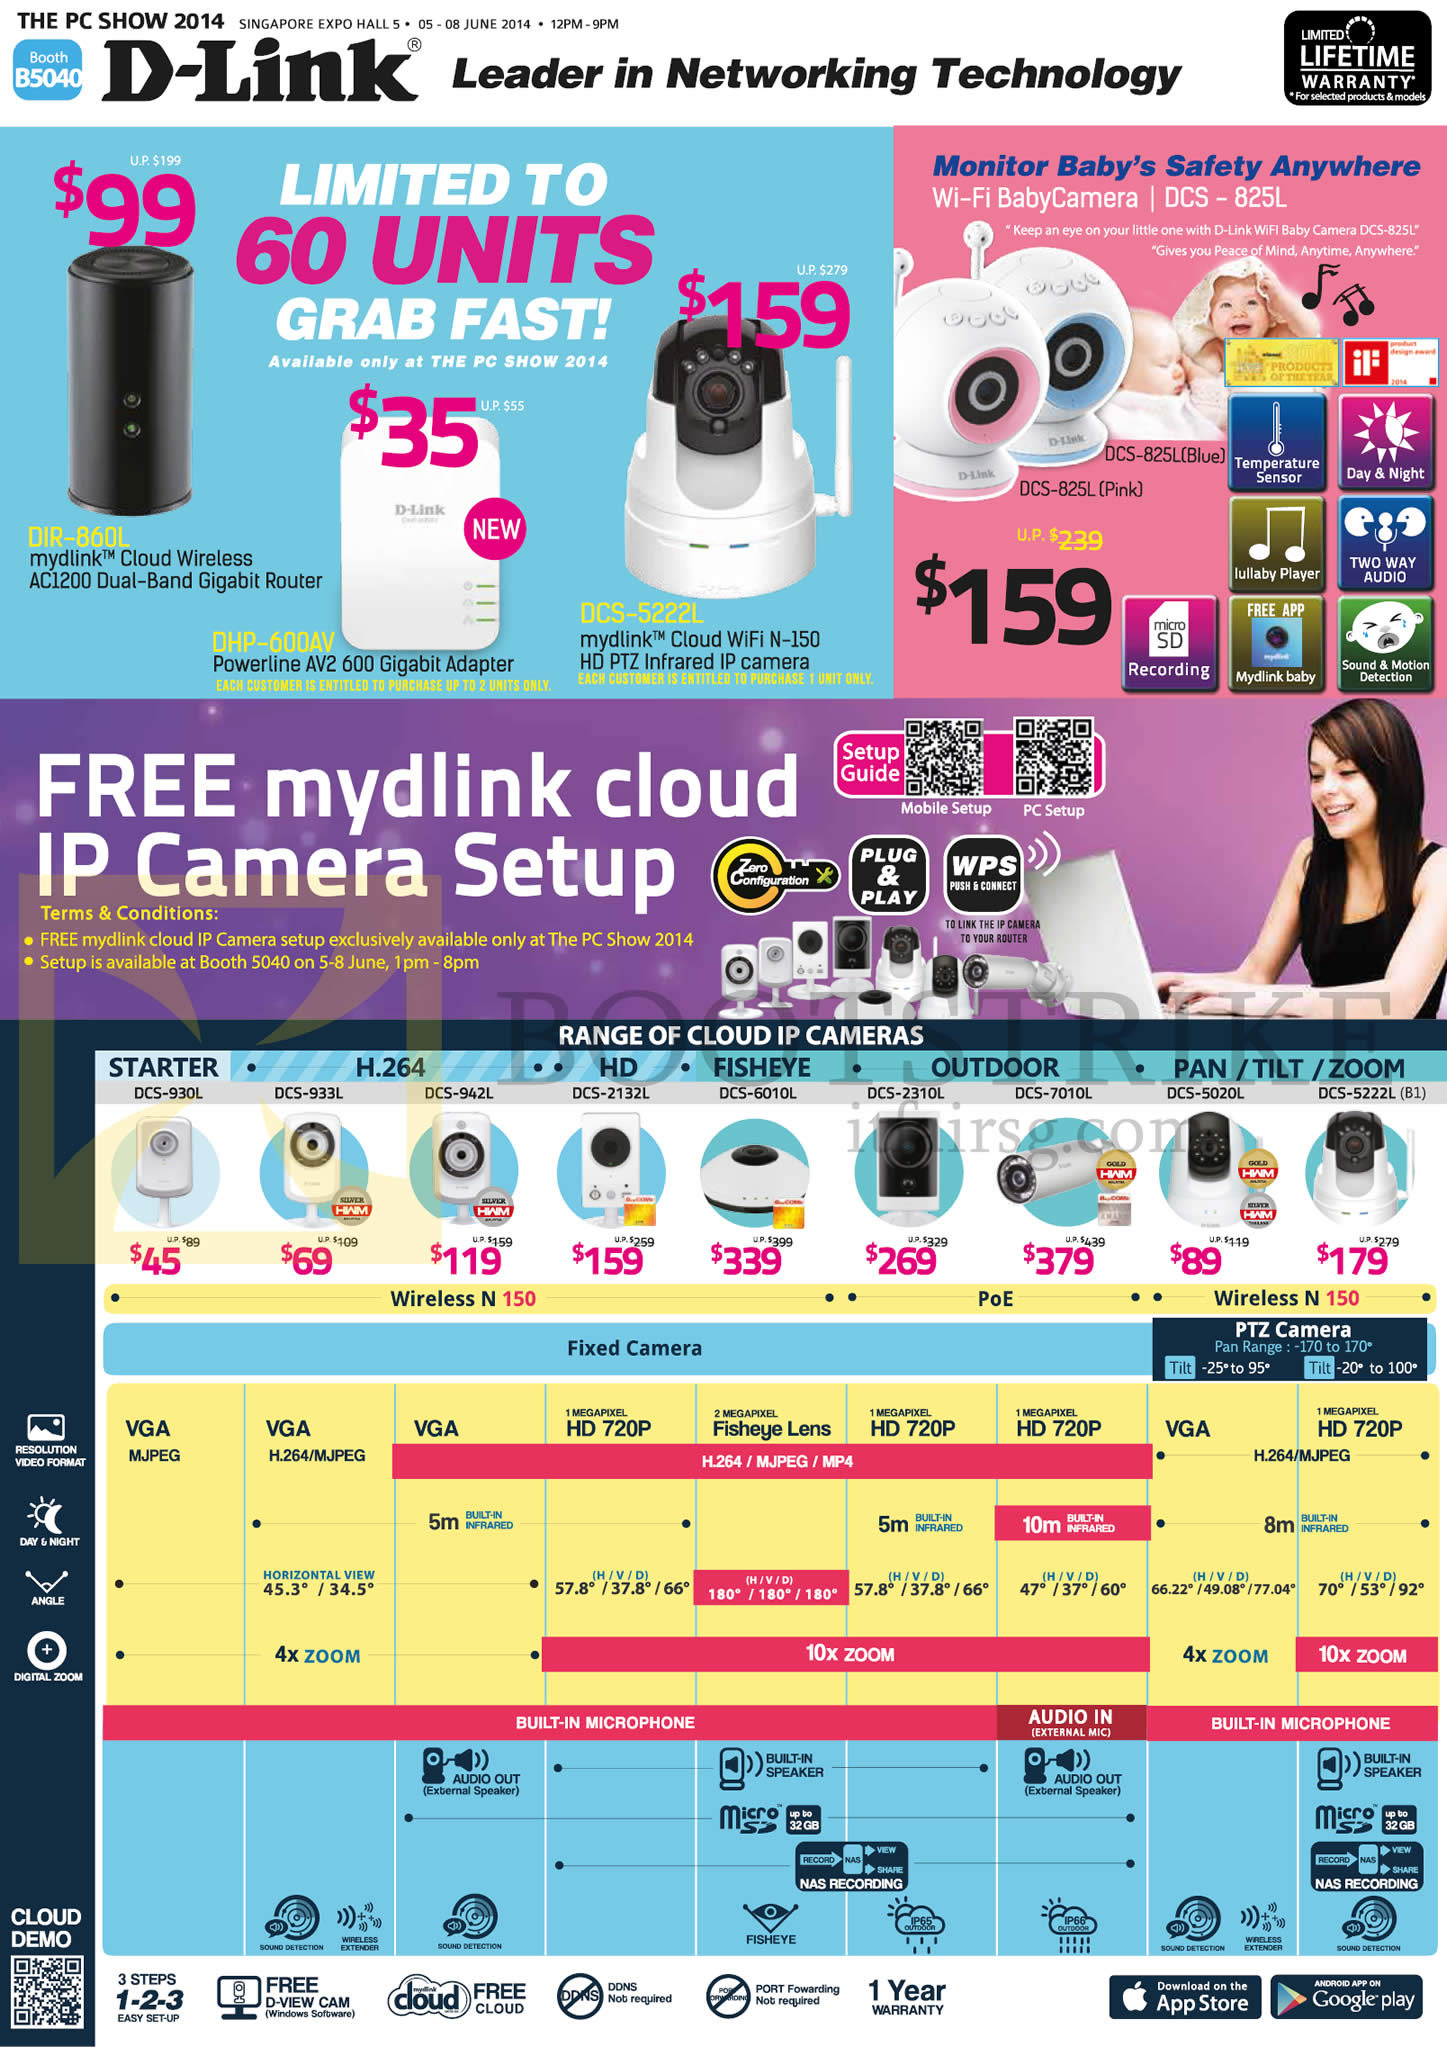 PC SHOW 2014 price list image brochure of D-Link Networking IP Cameras IPCam DCS-825L, 930L, 933L, 942L, 2132L, 6010L, 2310L, 7010L, 5020L, 5222L